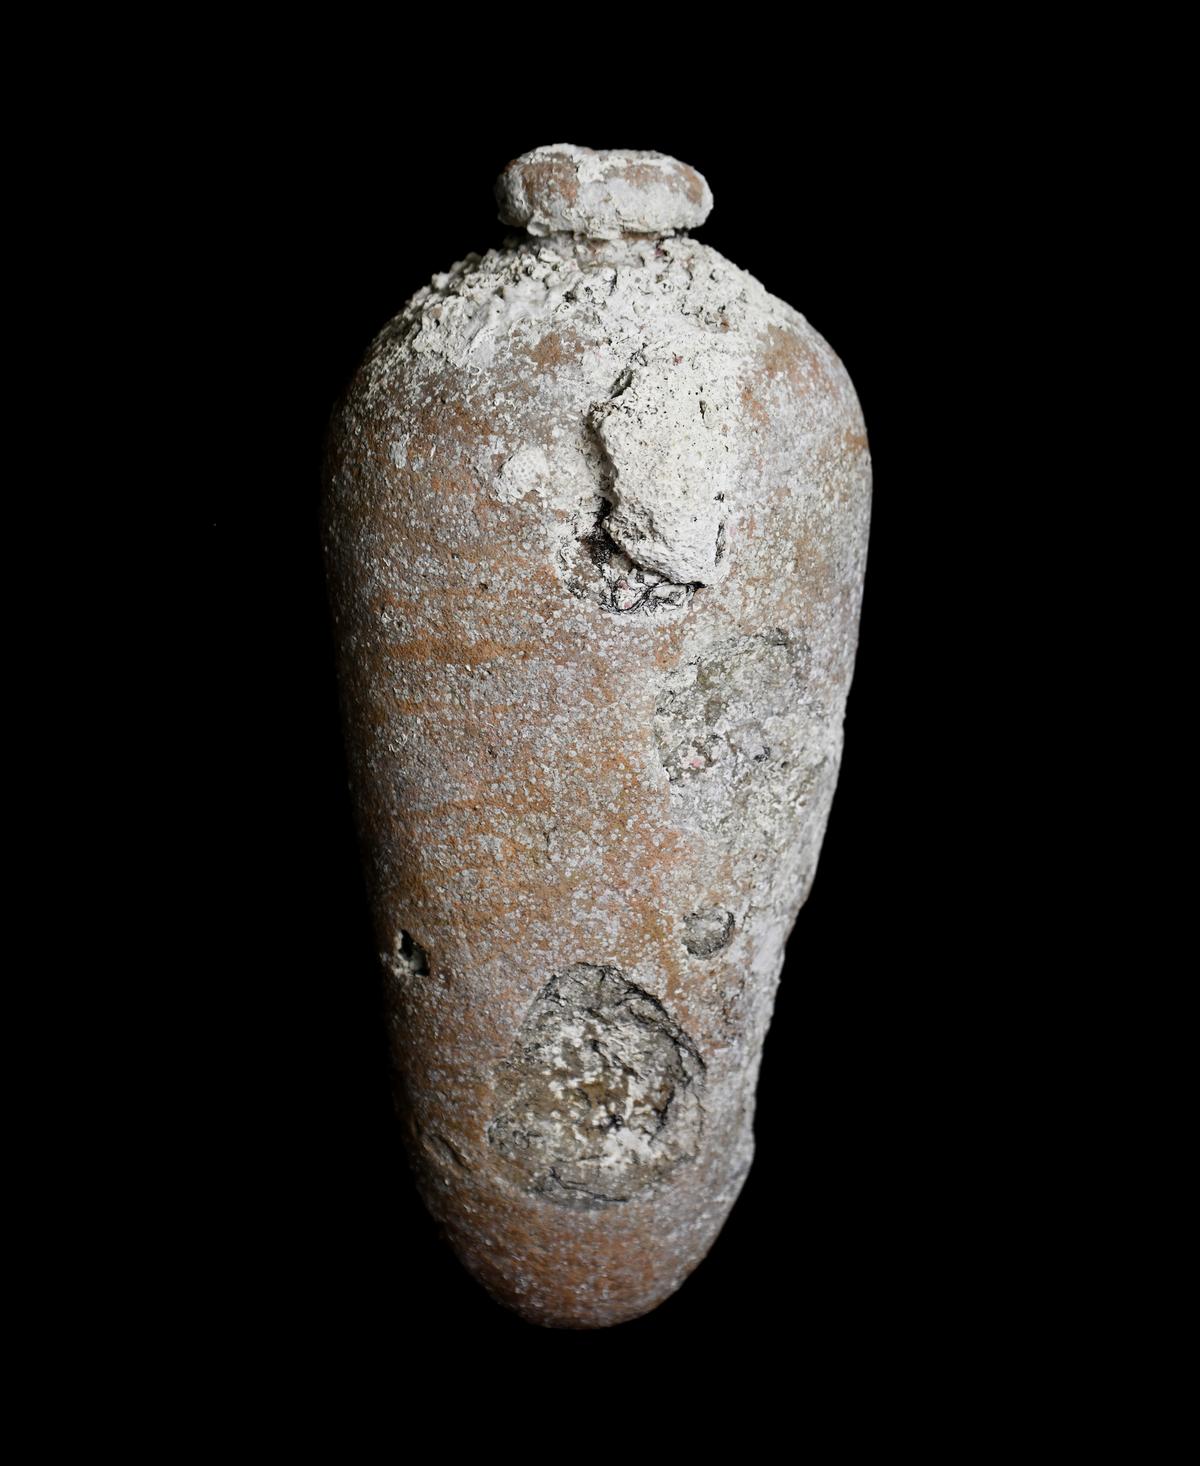 An "olive jar" from the wreck of the Maravillas. (Courtesy of Brendan Chavez/Allen Exploration via <a href="https://www.bahamasmaritimemuseum.com/">Bahamas Maritime Museum</a>).